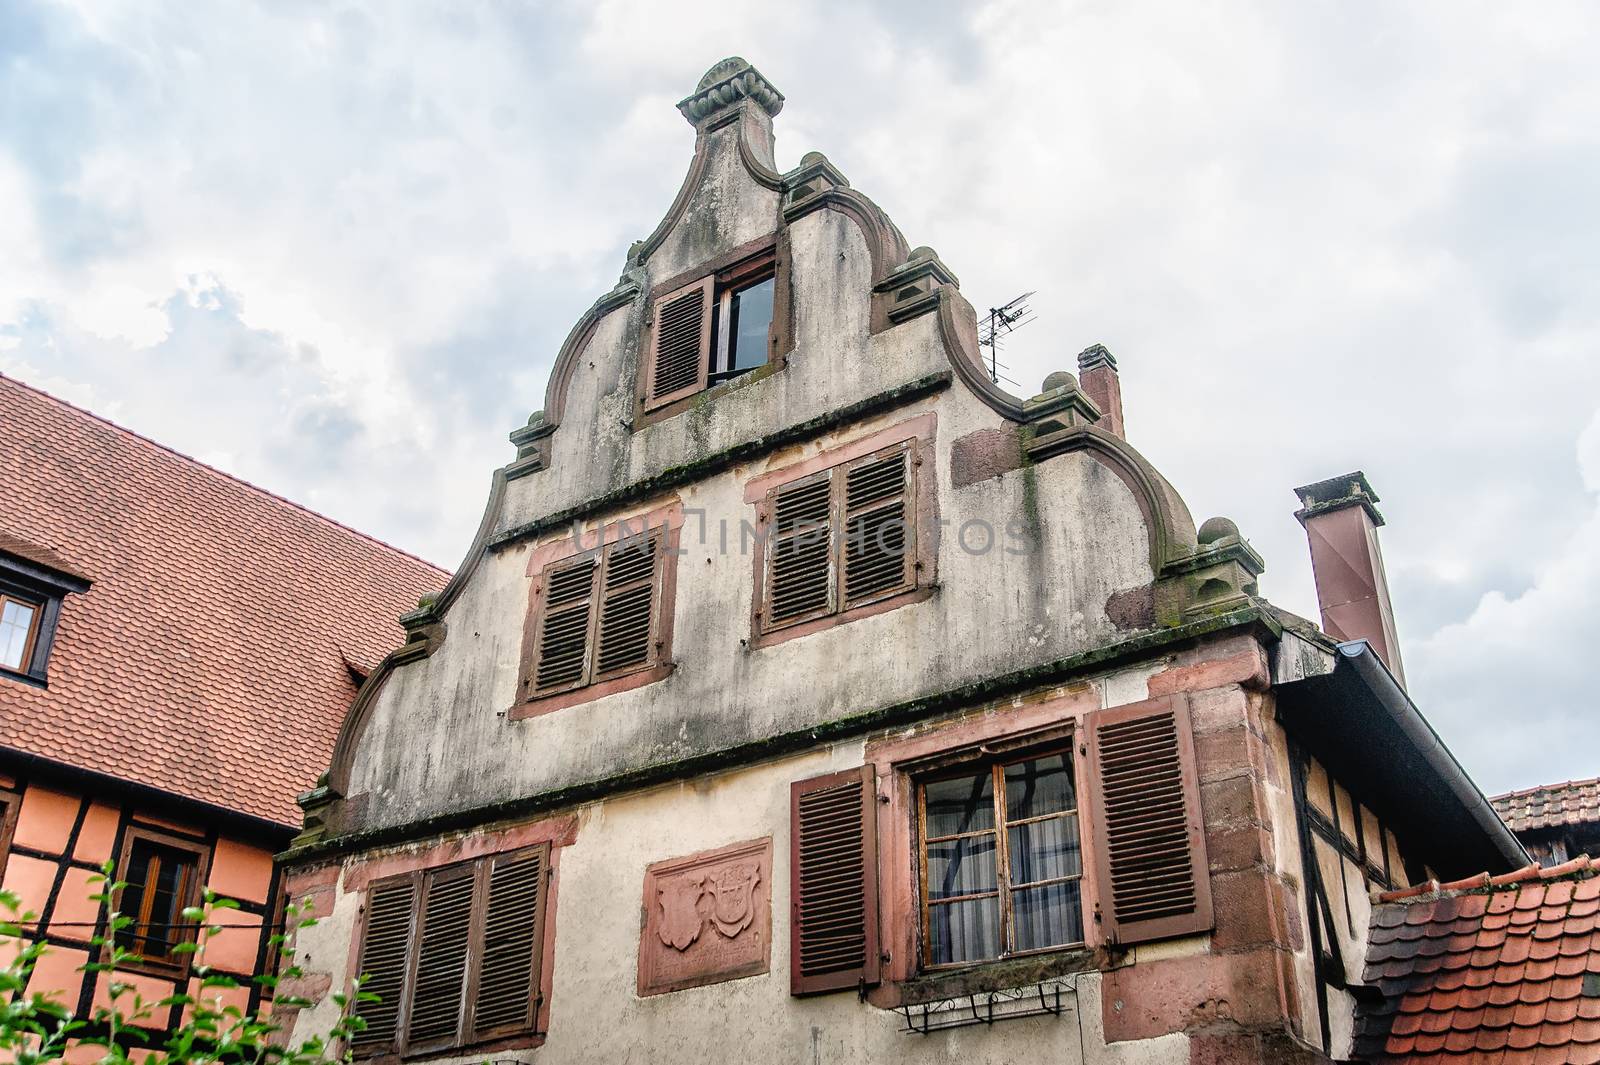 Top of a house in alsace by tepic